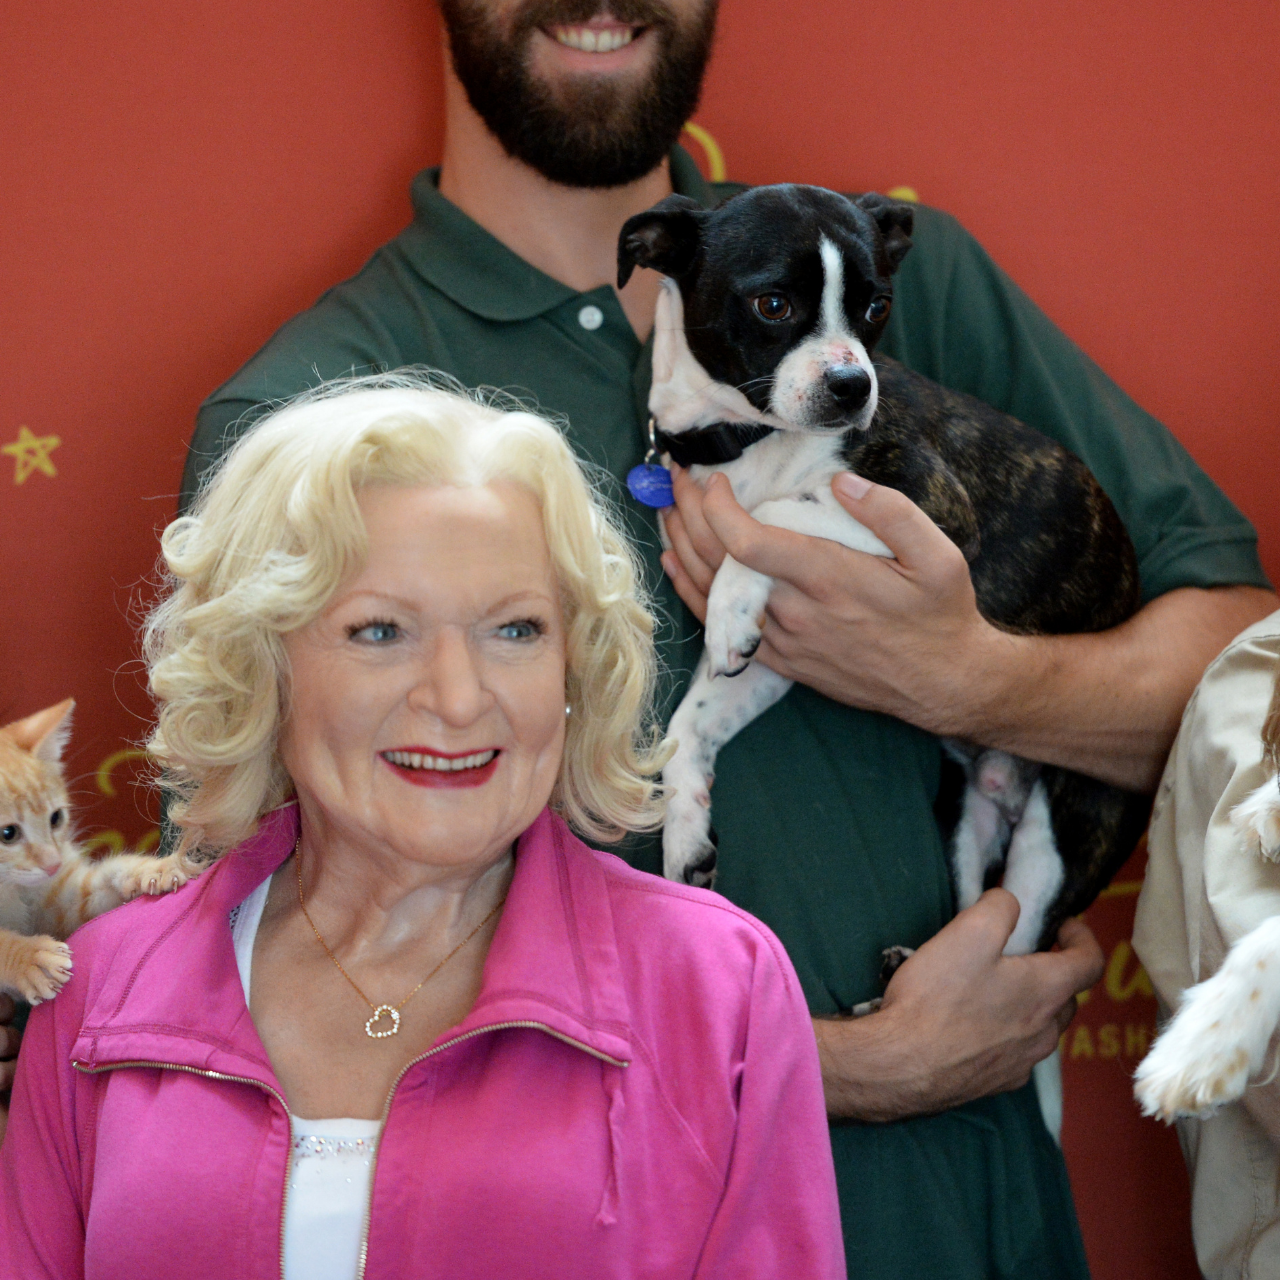 Betty White's wax Madame Tussaud's figure poses with along with many adoptable dogs, cats, puppies and kittens